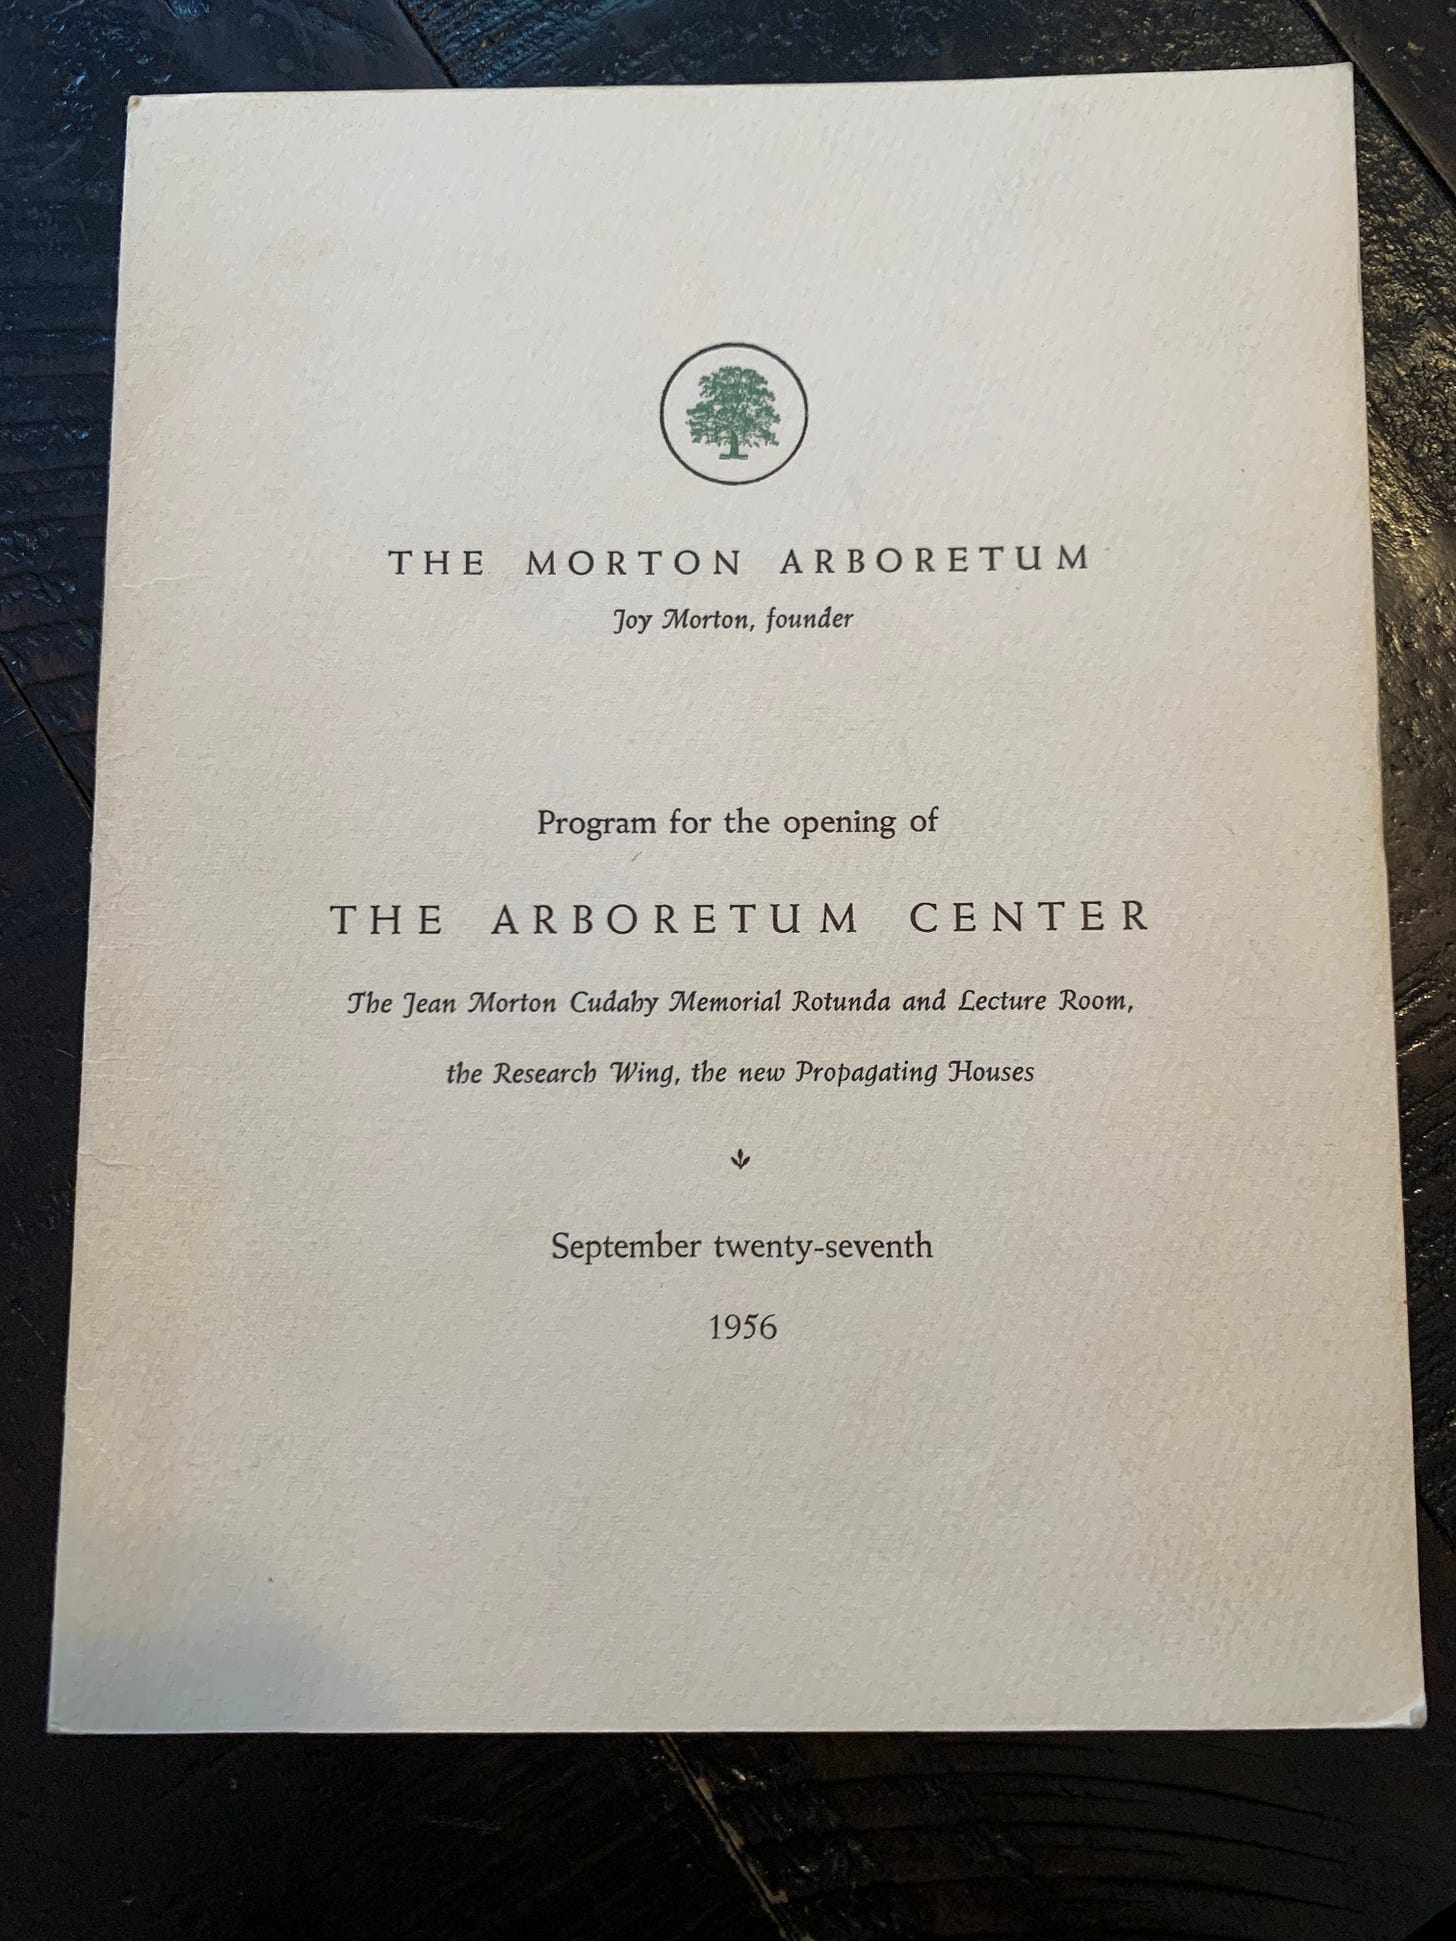 Photo of a "Program for the Opening of The Arboretum Center, The Jean Morton Cudahy Memorial Rotunda and Lecture Room, the Research Wing, the new Propogating Houses"